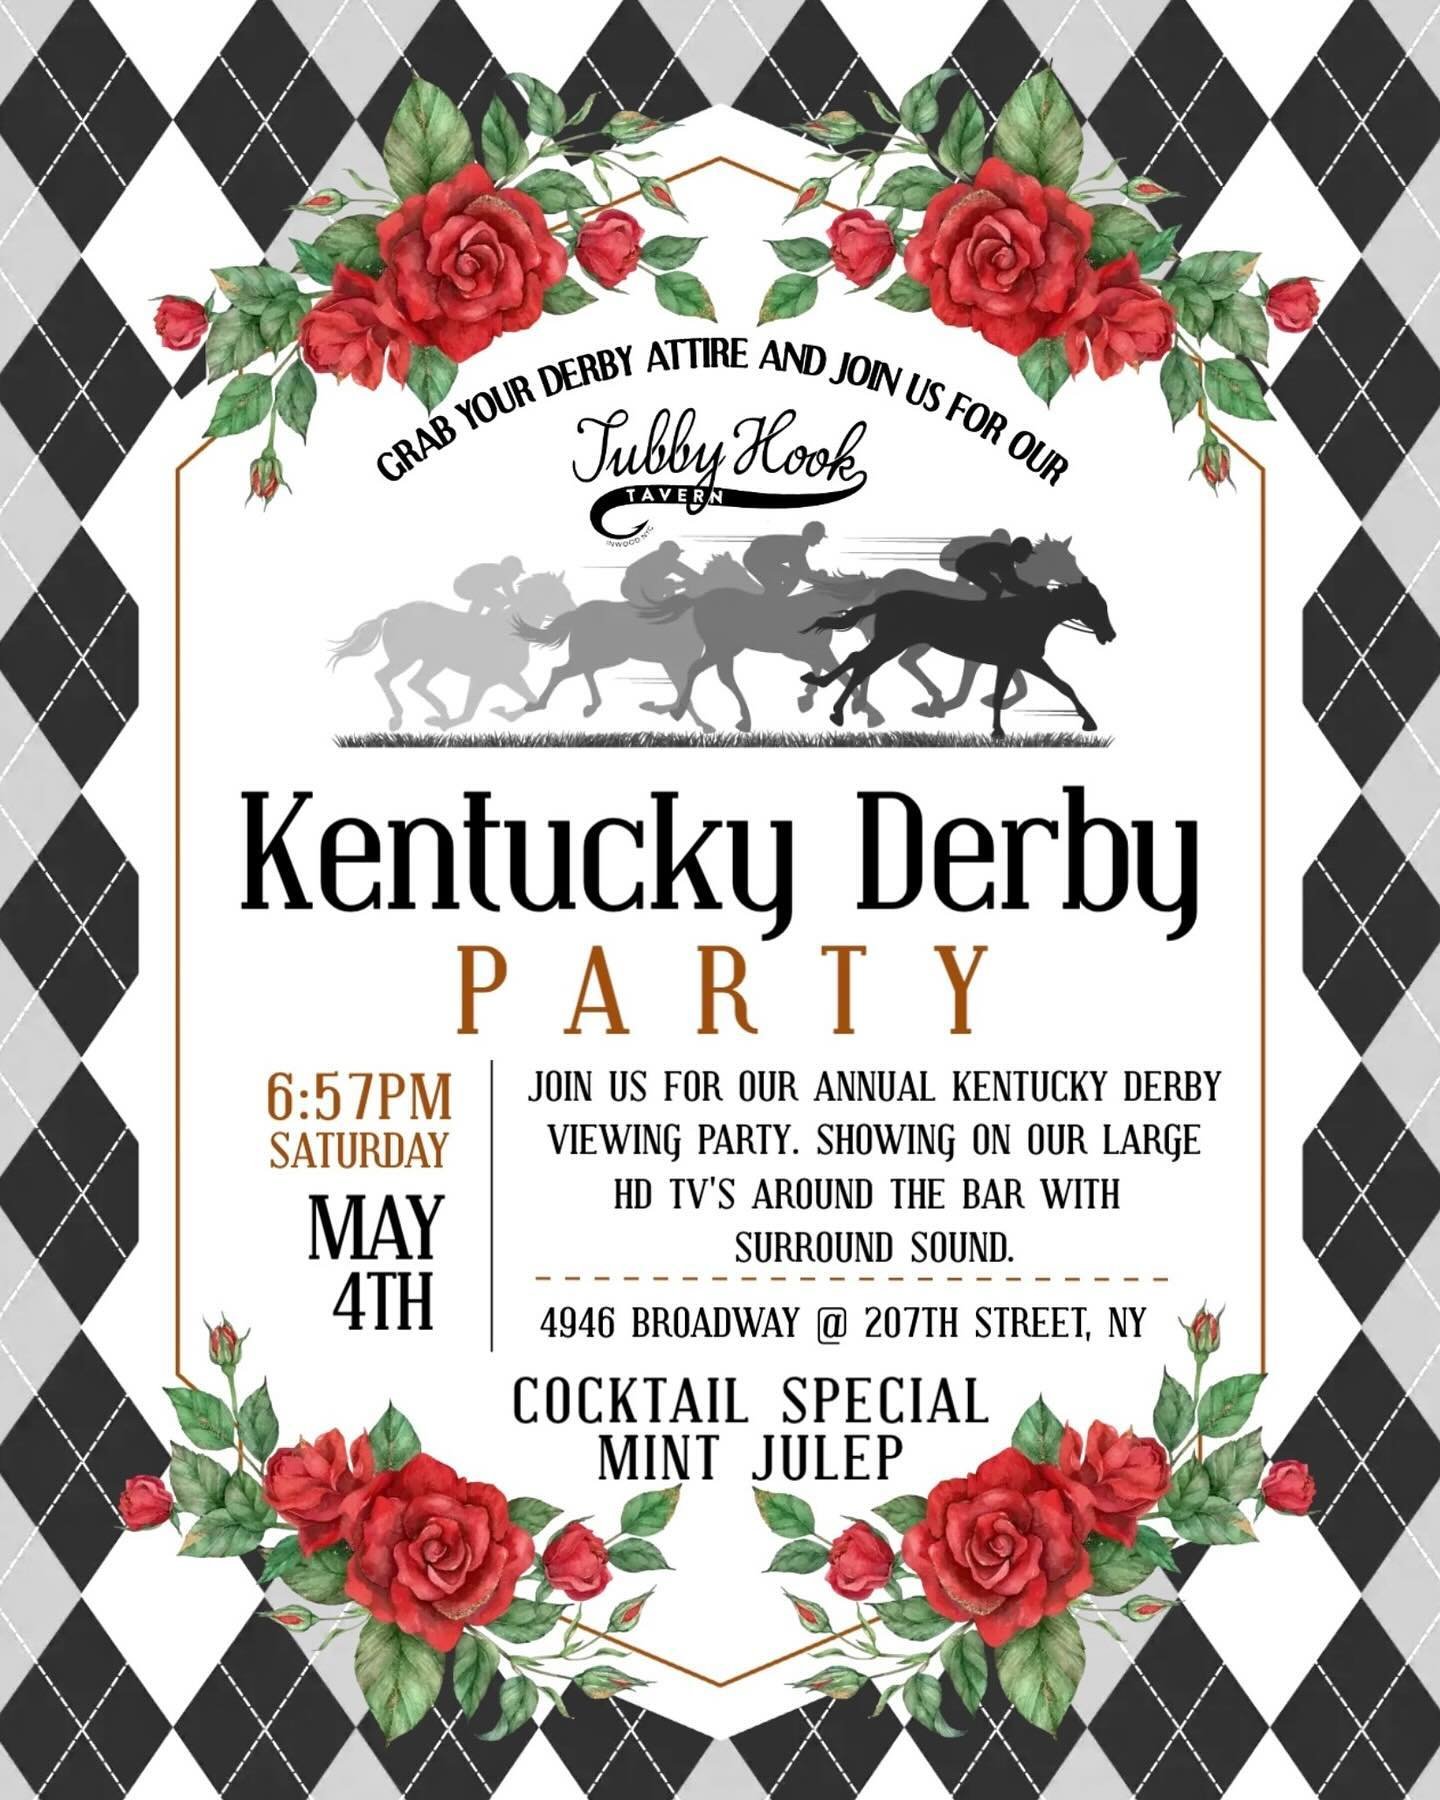 🐎🎉 Saddle up, folks! Tomorrow, the Kentucky Derby gallops into Tubby Hook for a viewing party you won&rsquo;t want to miss! 🌹🍹

Join us for mint juleps, Cinco De Mayo specials available and a lively atmosphere as we celebrate the most exciting tw